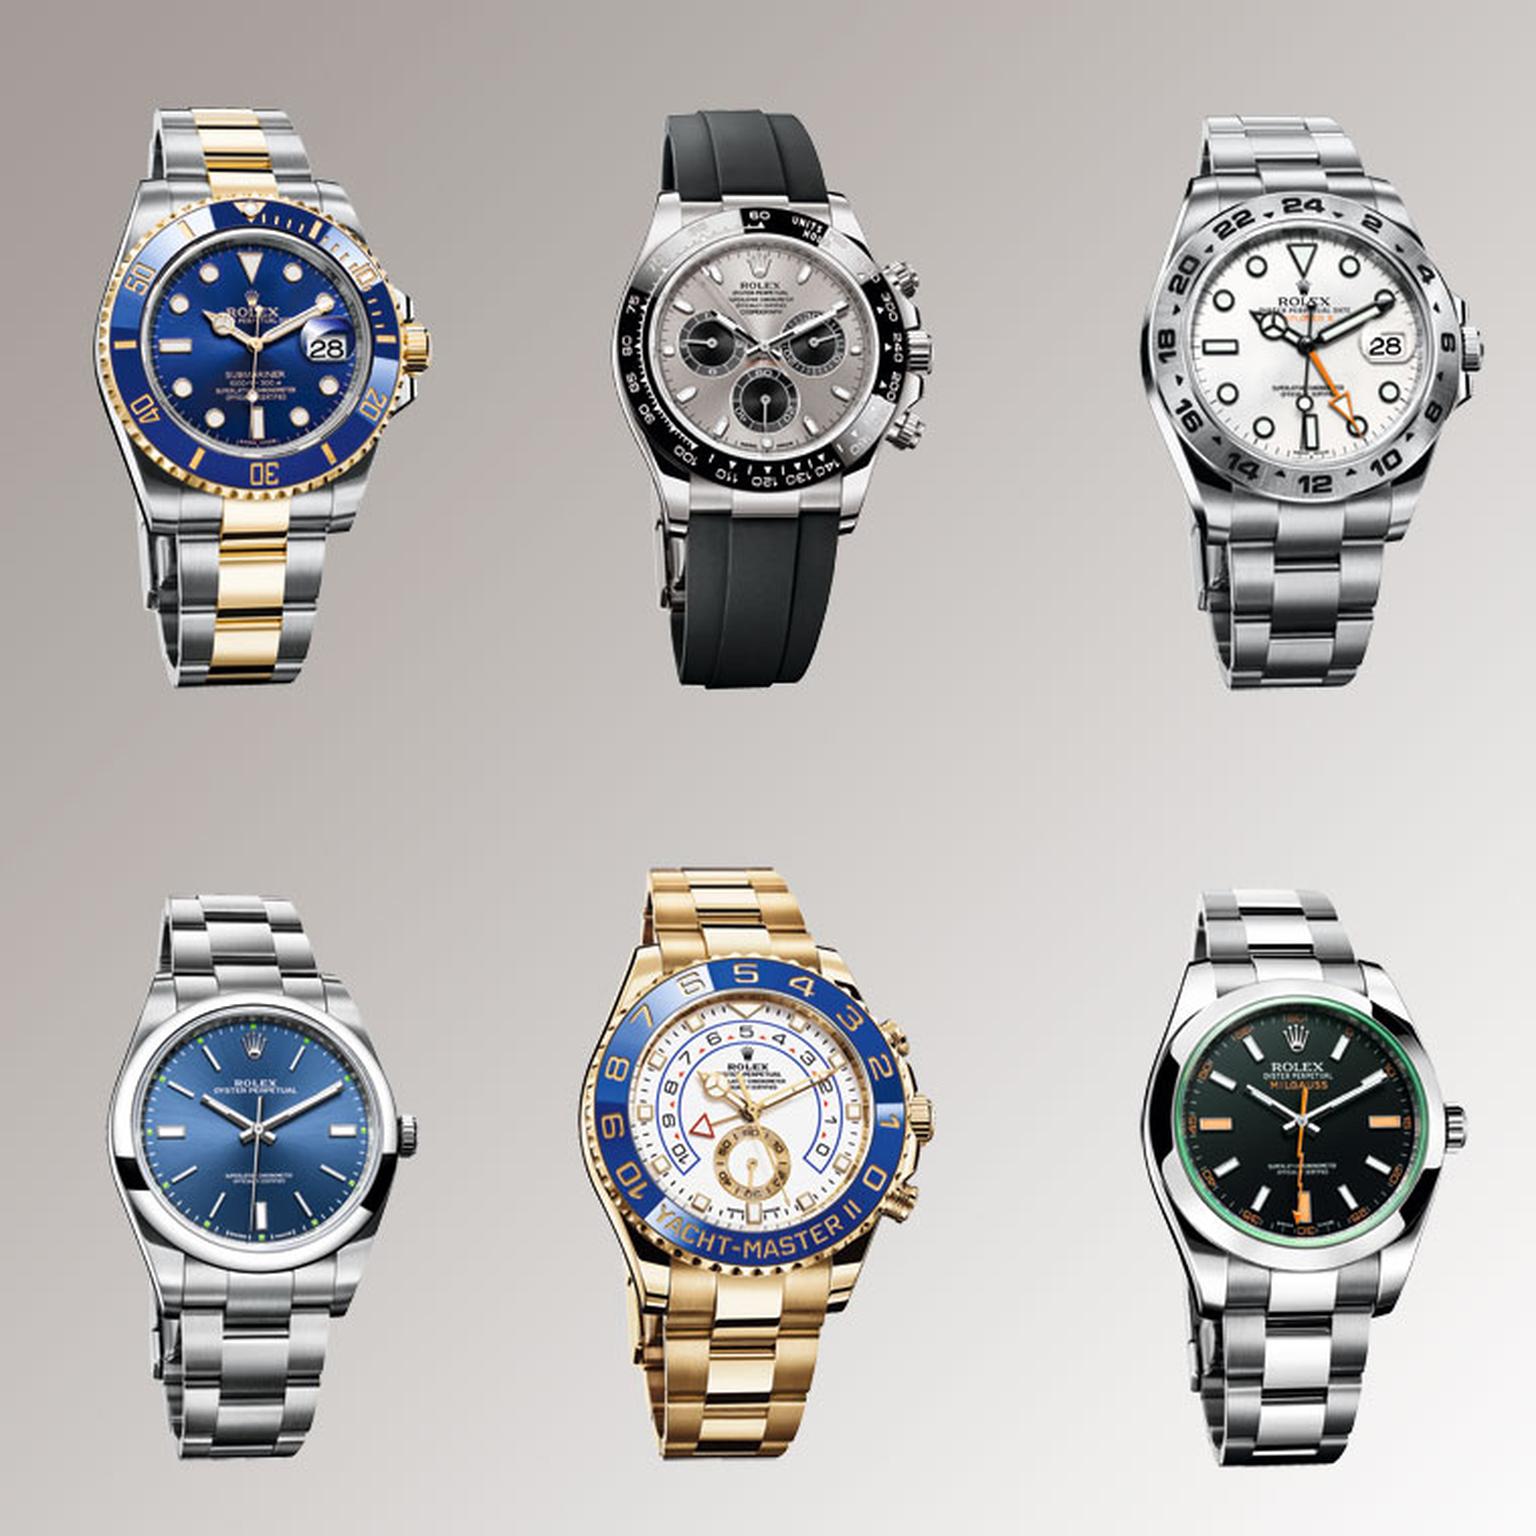 Exploring High-Quality Watch Replicas: Finding the Best Fake Watches Money Can Buy